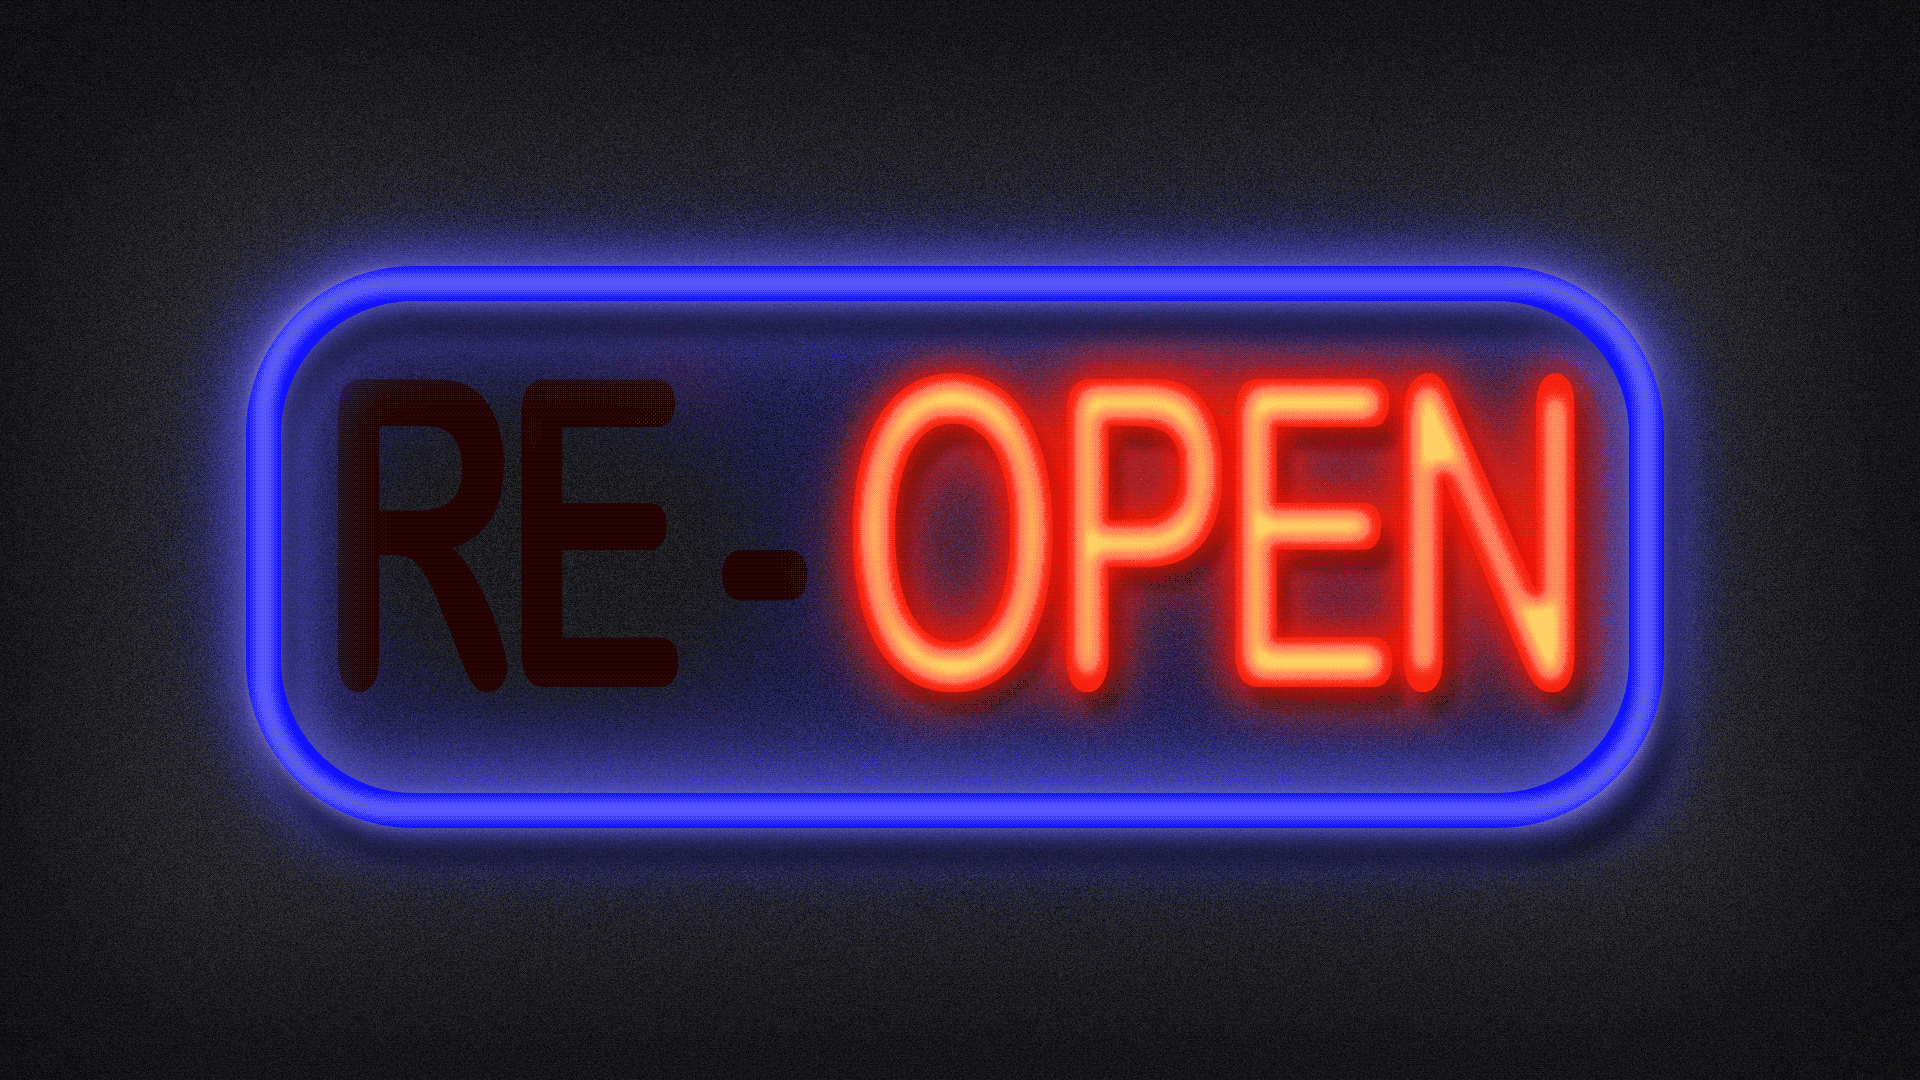 Animated gif of a sign that reads "re-open" with the "re" flashing on and off